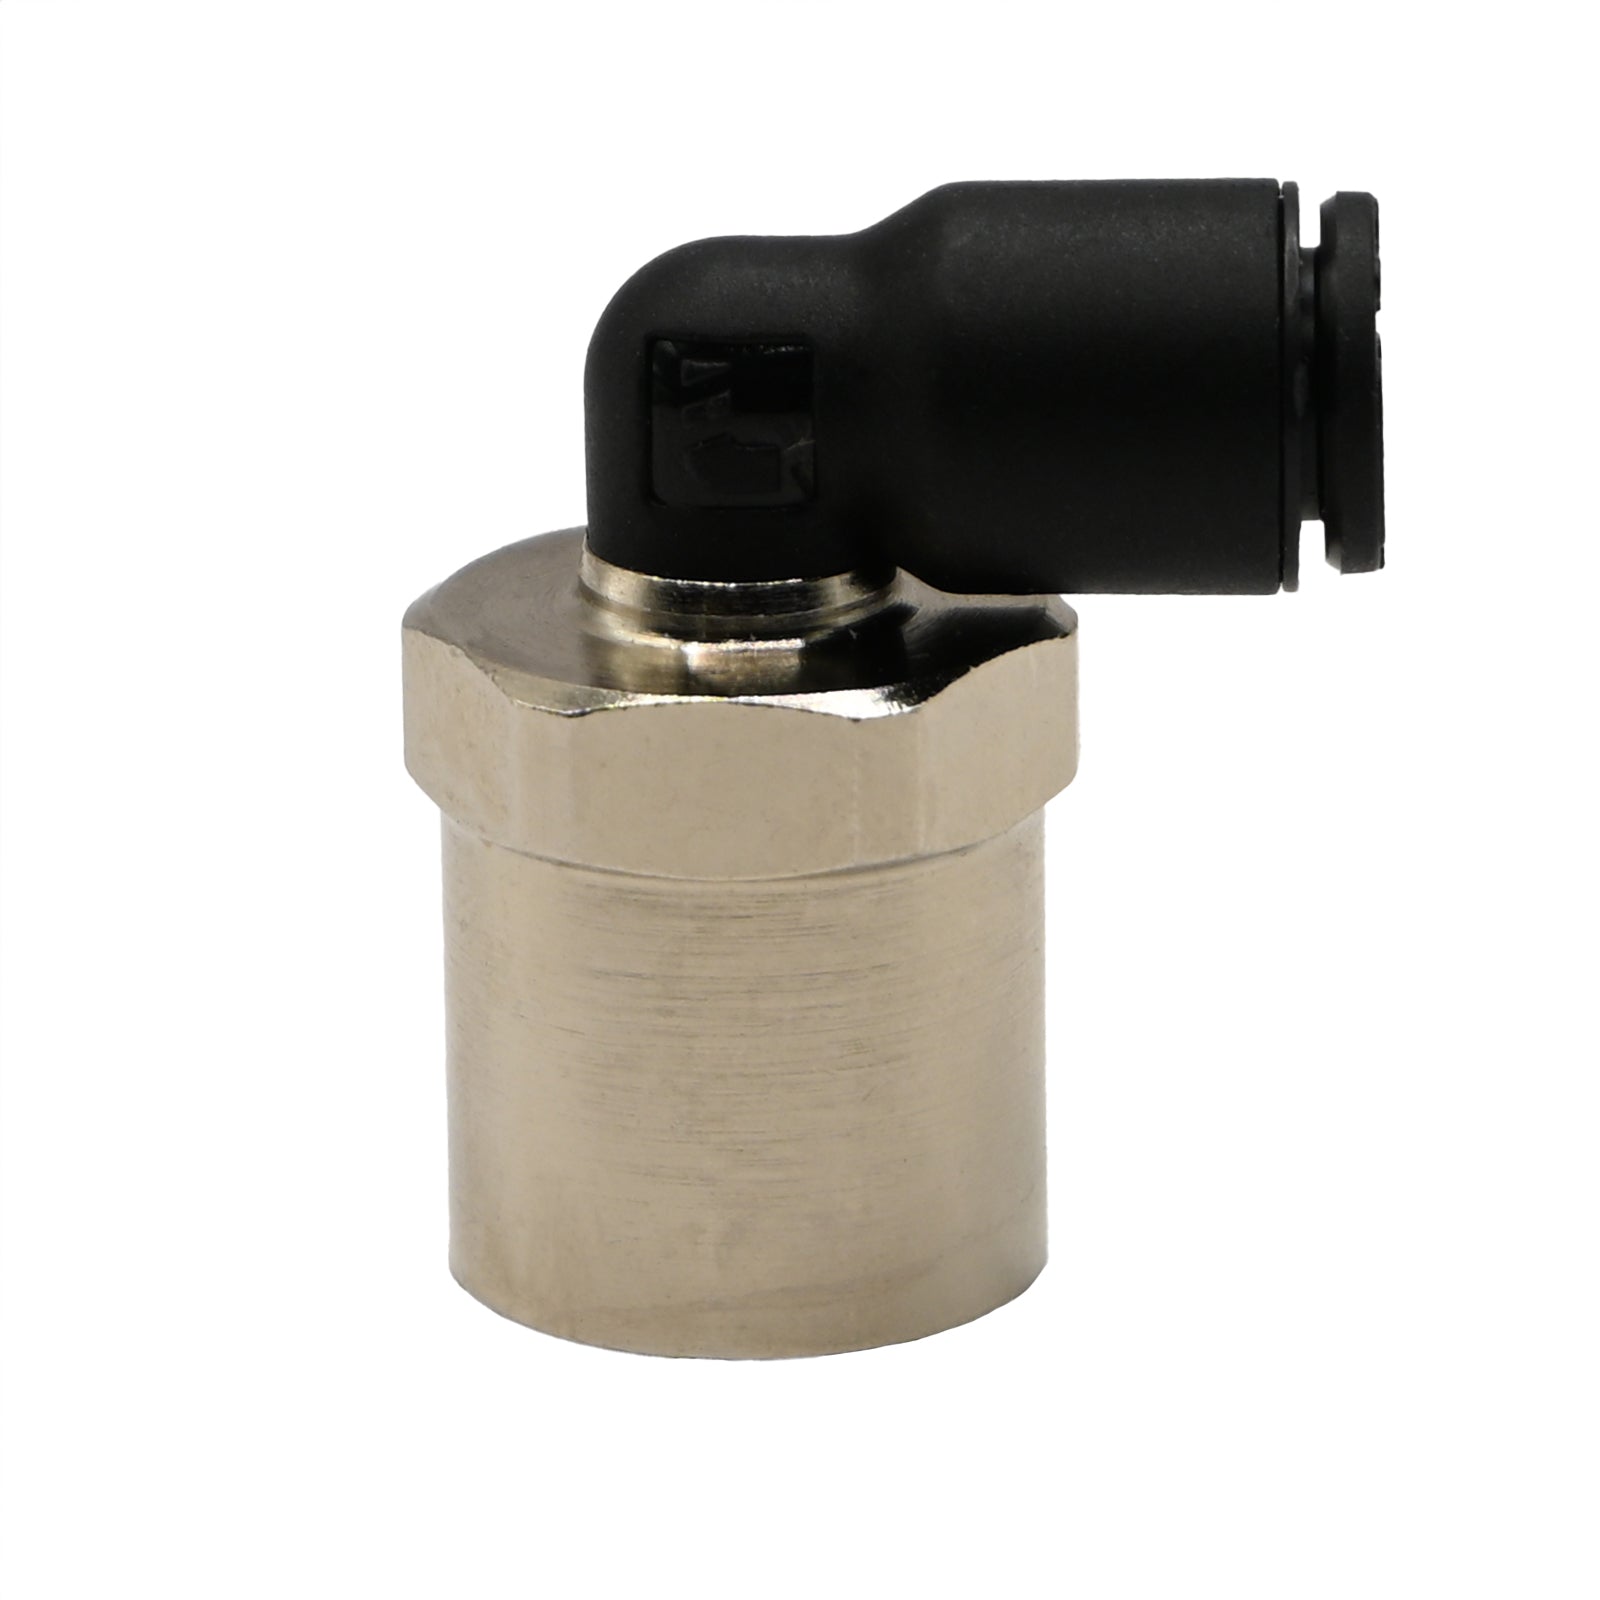 90 degree swivel elbow push to connect tube fitting with nickel plated threaded brass base and black plastic tube connector. Part shown on white background. 